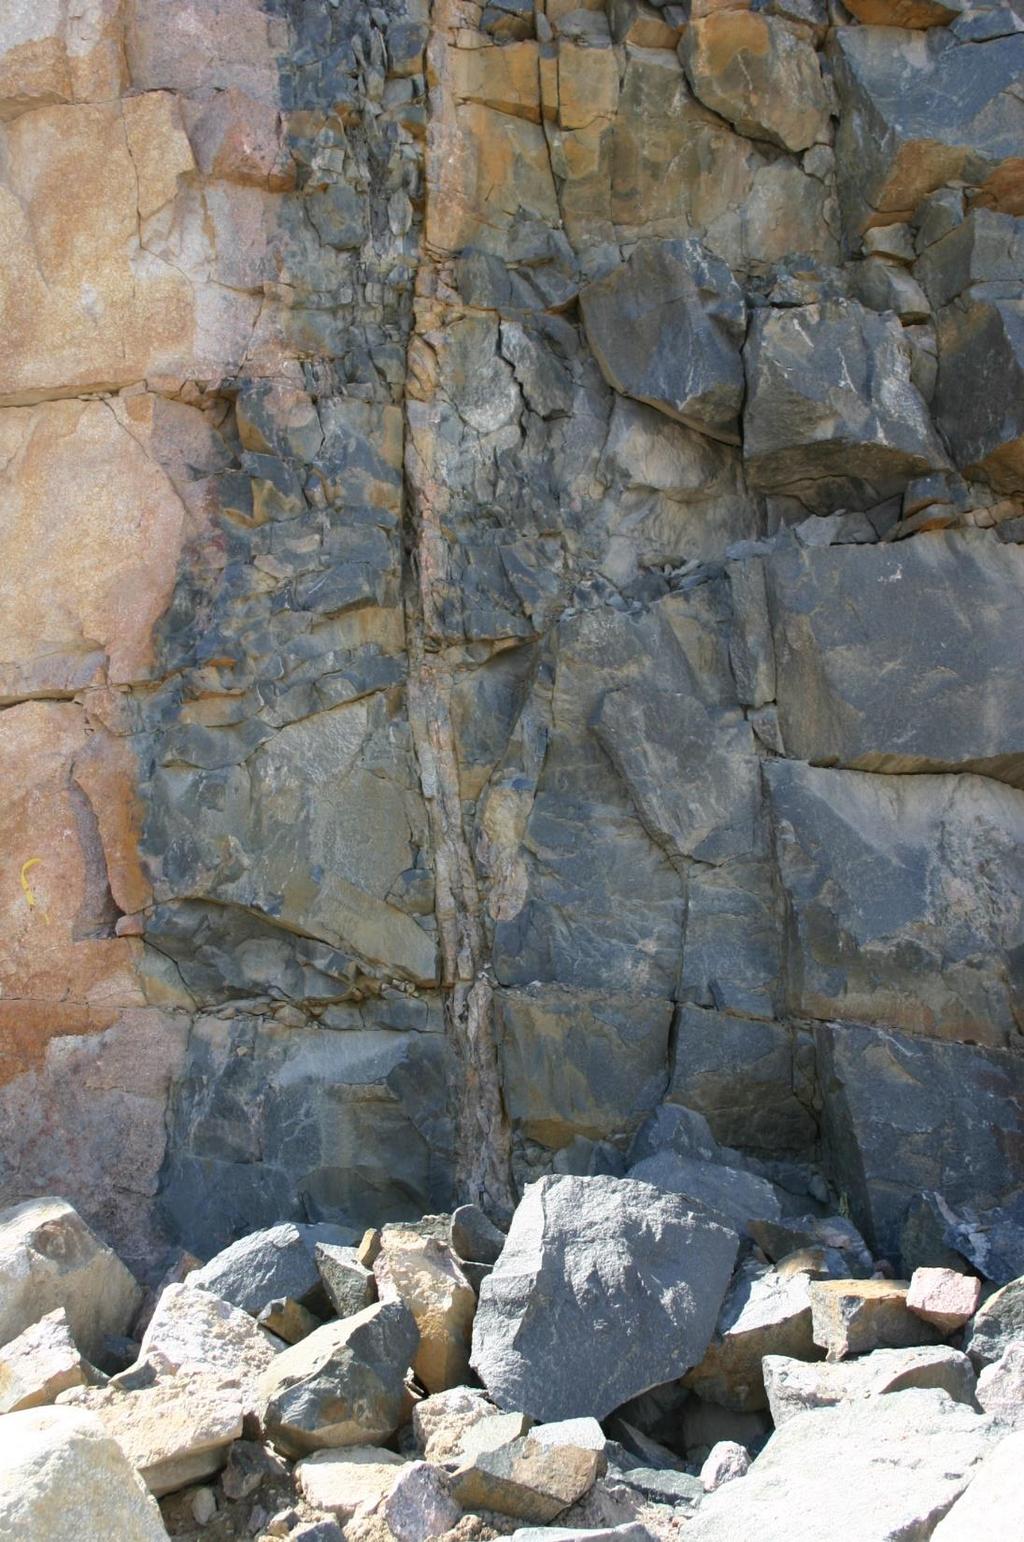 Rock brokenness Comprised from fractures and faults caused by tectonic movements, thermal effects and land uplift, Resulting a complicated fracture pattern, difficult to model using deterministic